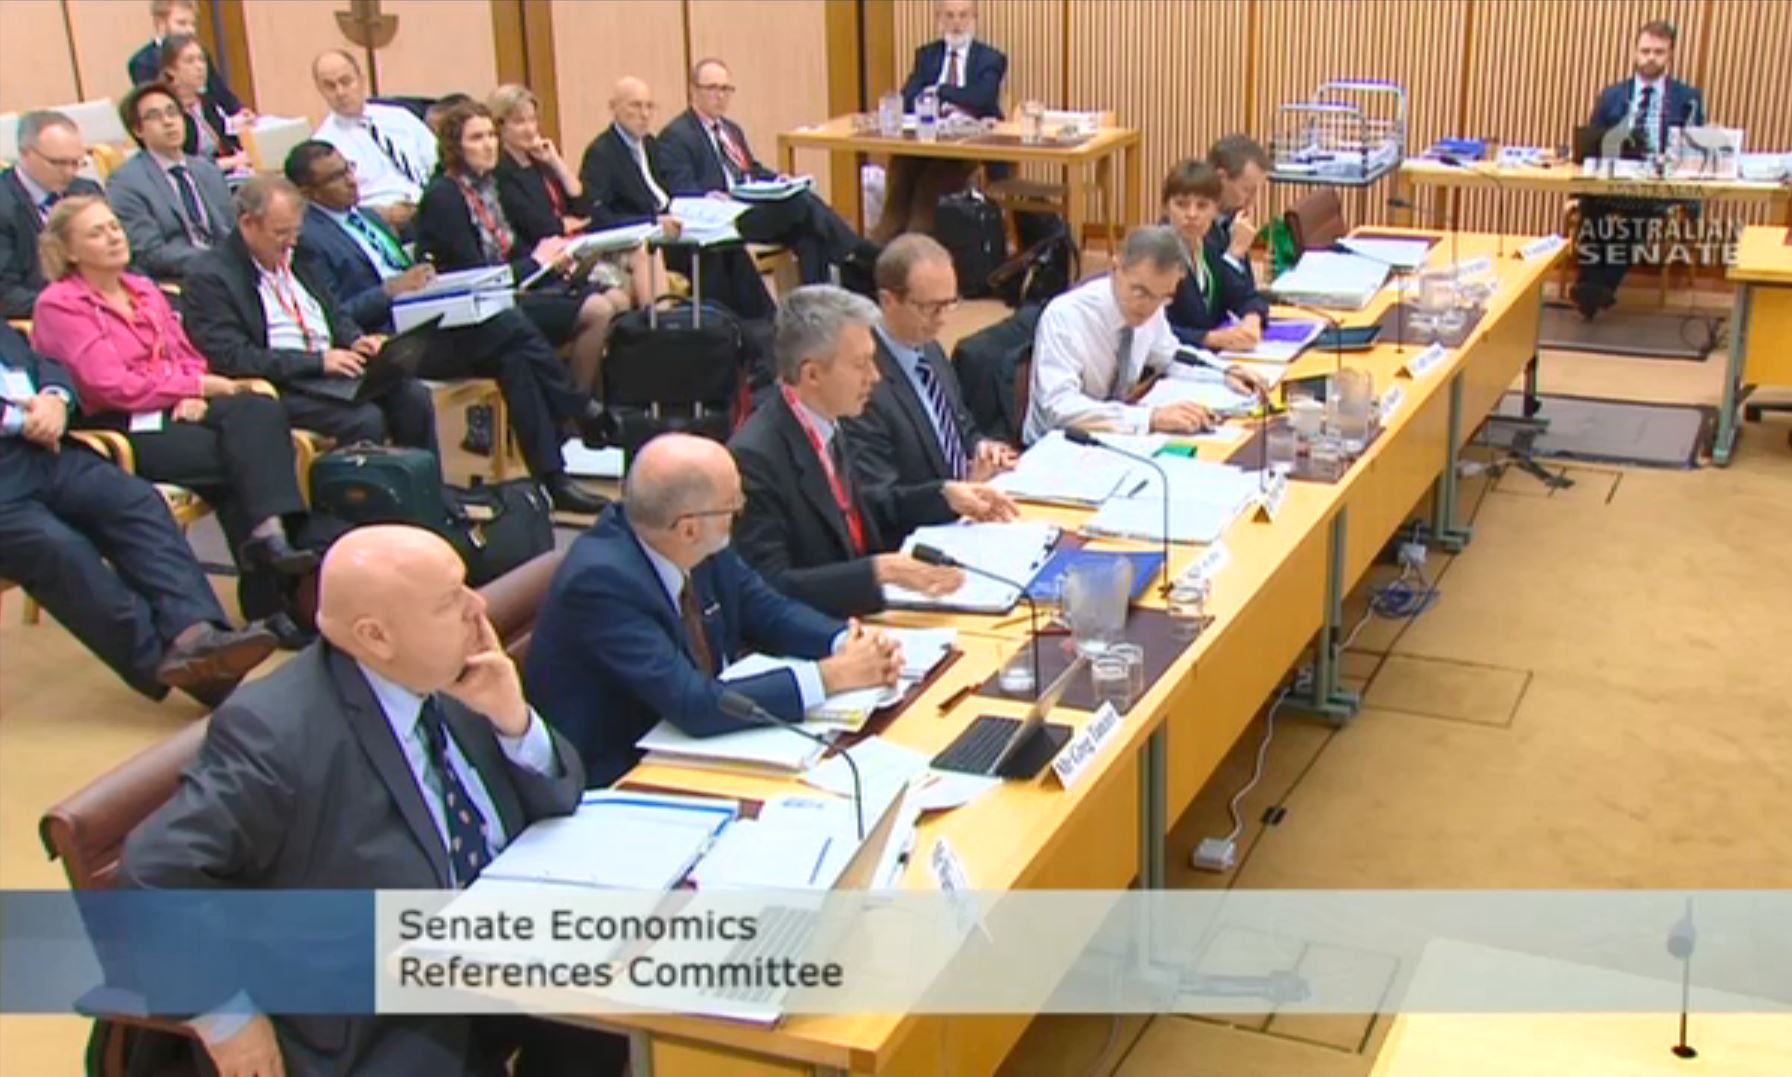 ASIC Commissioners and senior executives at an ASIC inquiry hearing in Canberra on 10 April 2014.